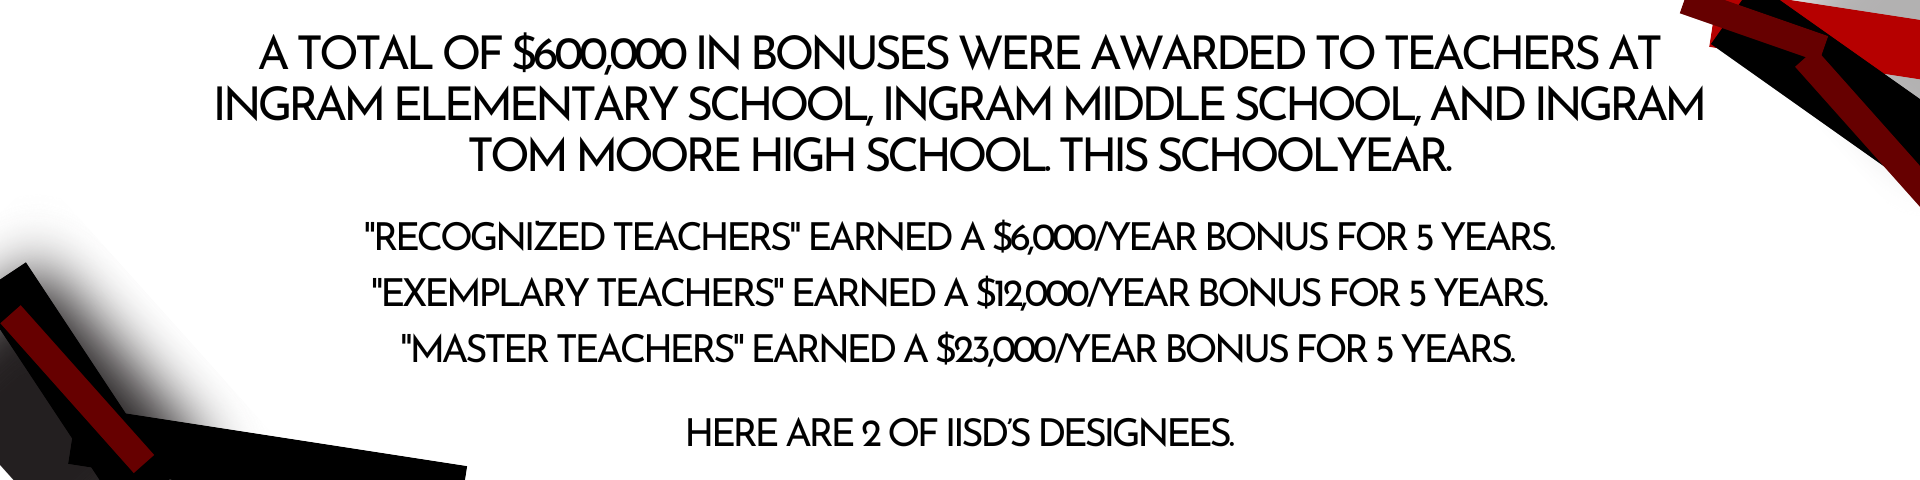 Header Describing Teacher Incentive Allotment: A total of $600,000 in bonuses were awarded to teachers at Ingram Elementary School, Ingram Middle School, and Ingram Tom Moore High School. this schoolyear.  "Recognized Teachers" earned a $6,000/year bonus for 5 years  "Exemplary Teachers" earned a $12,000/year bonus for 5 years  ﻿"Master Teachers" earned a $23,000/year bonus for 5 years  Here is a feature of one of IISD’s Designees